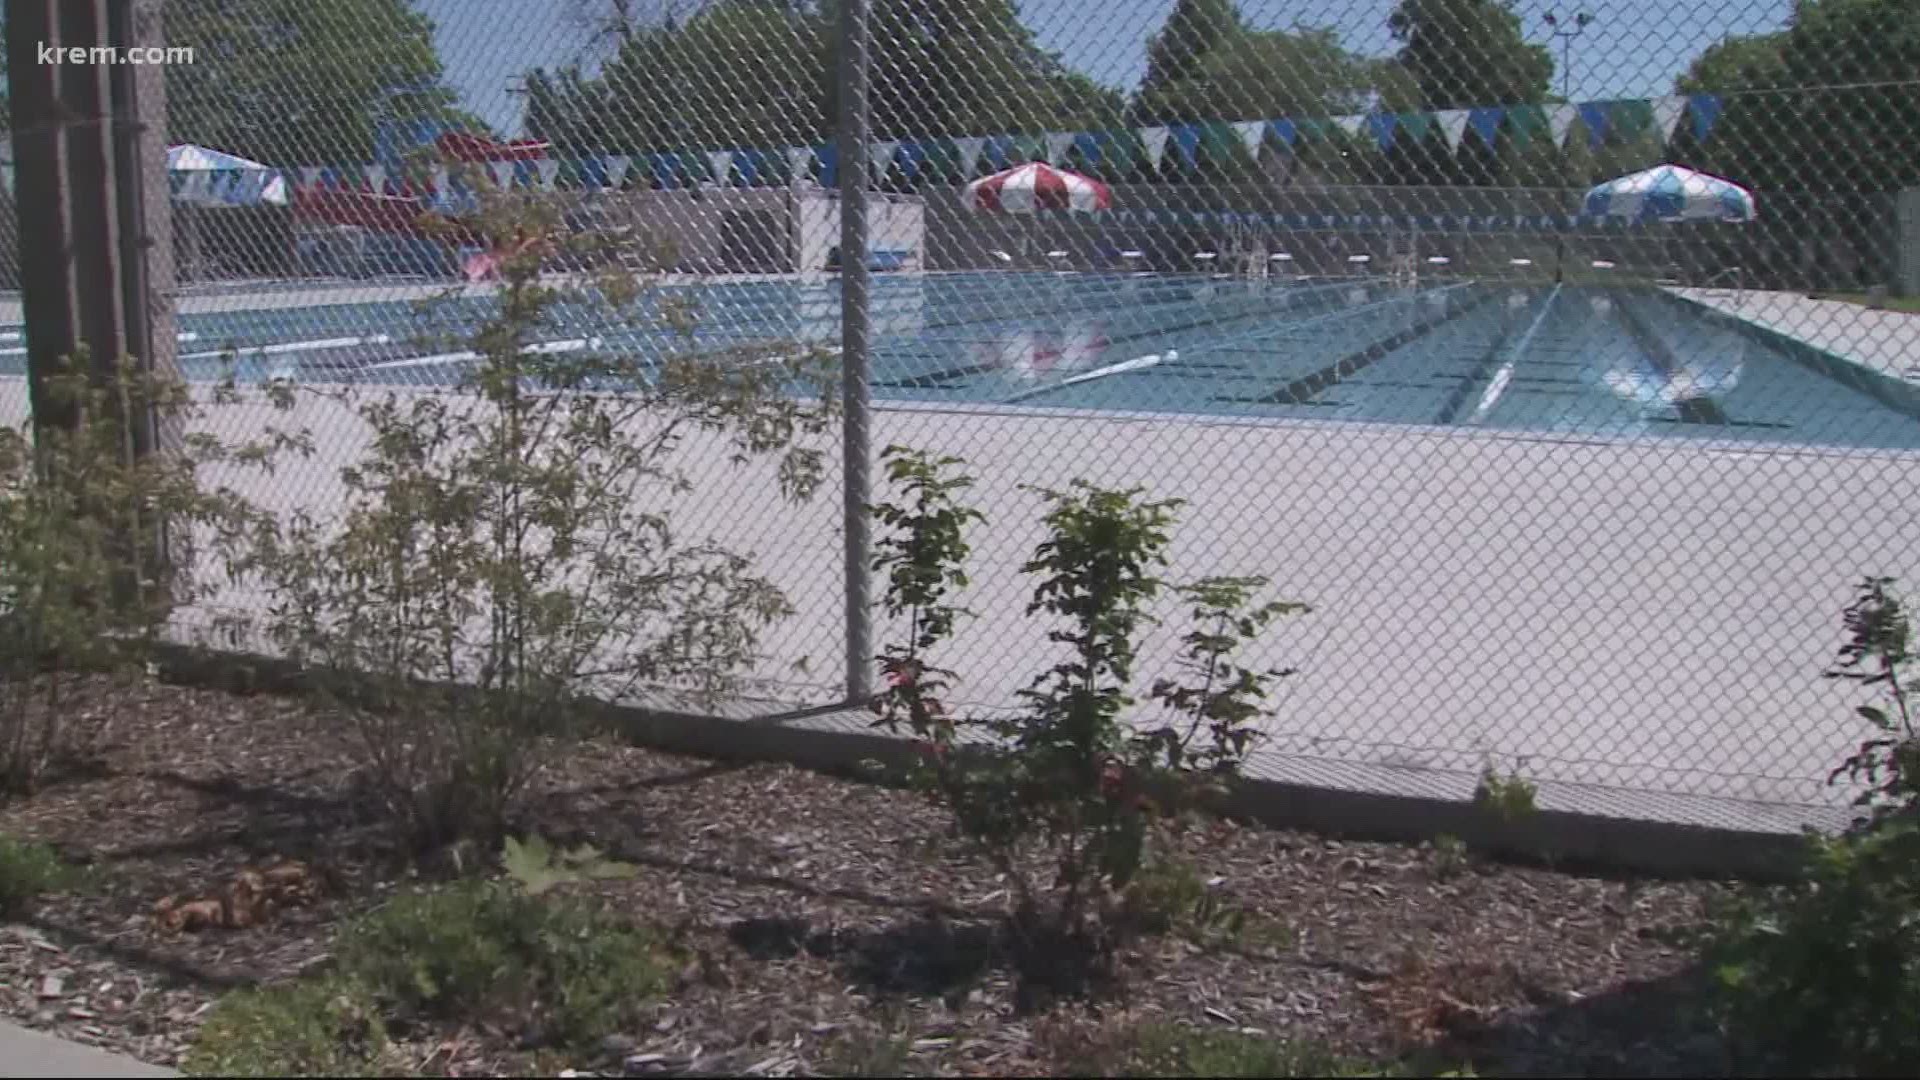 The City says they have a shortage of employees, leading to water features being being closed. But, they say the community can help fix this.